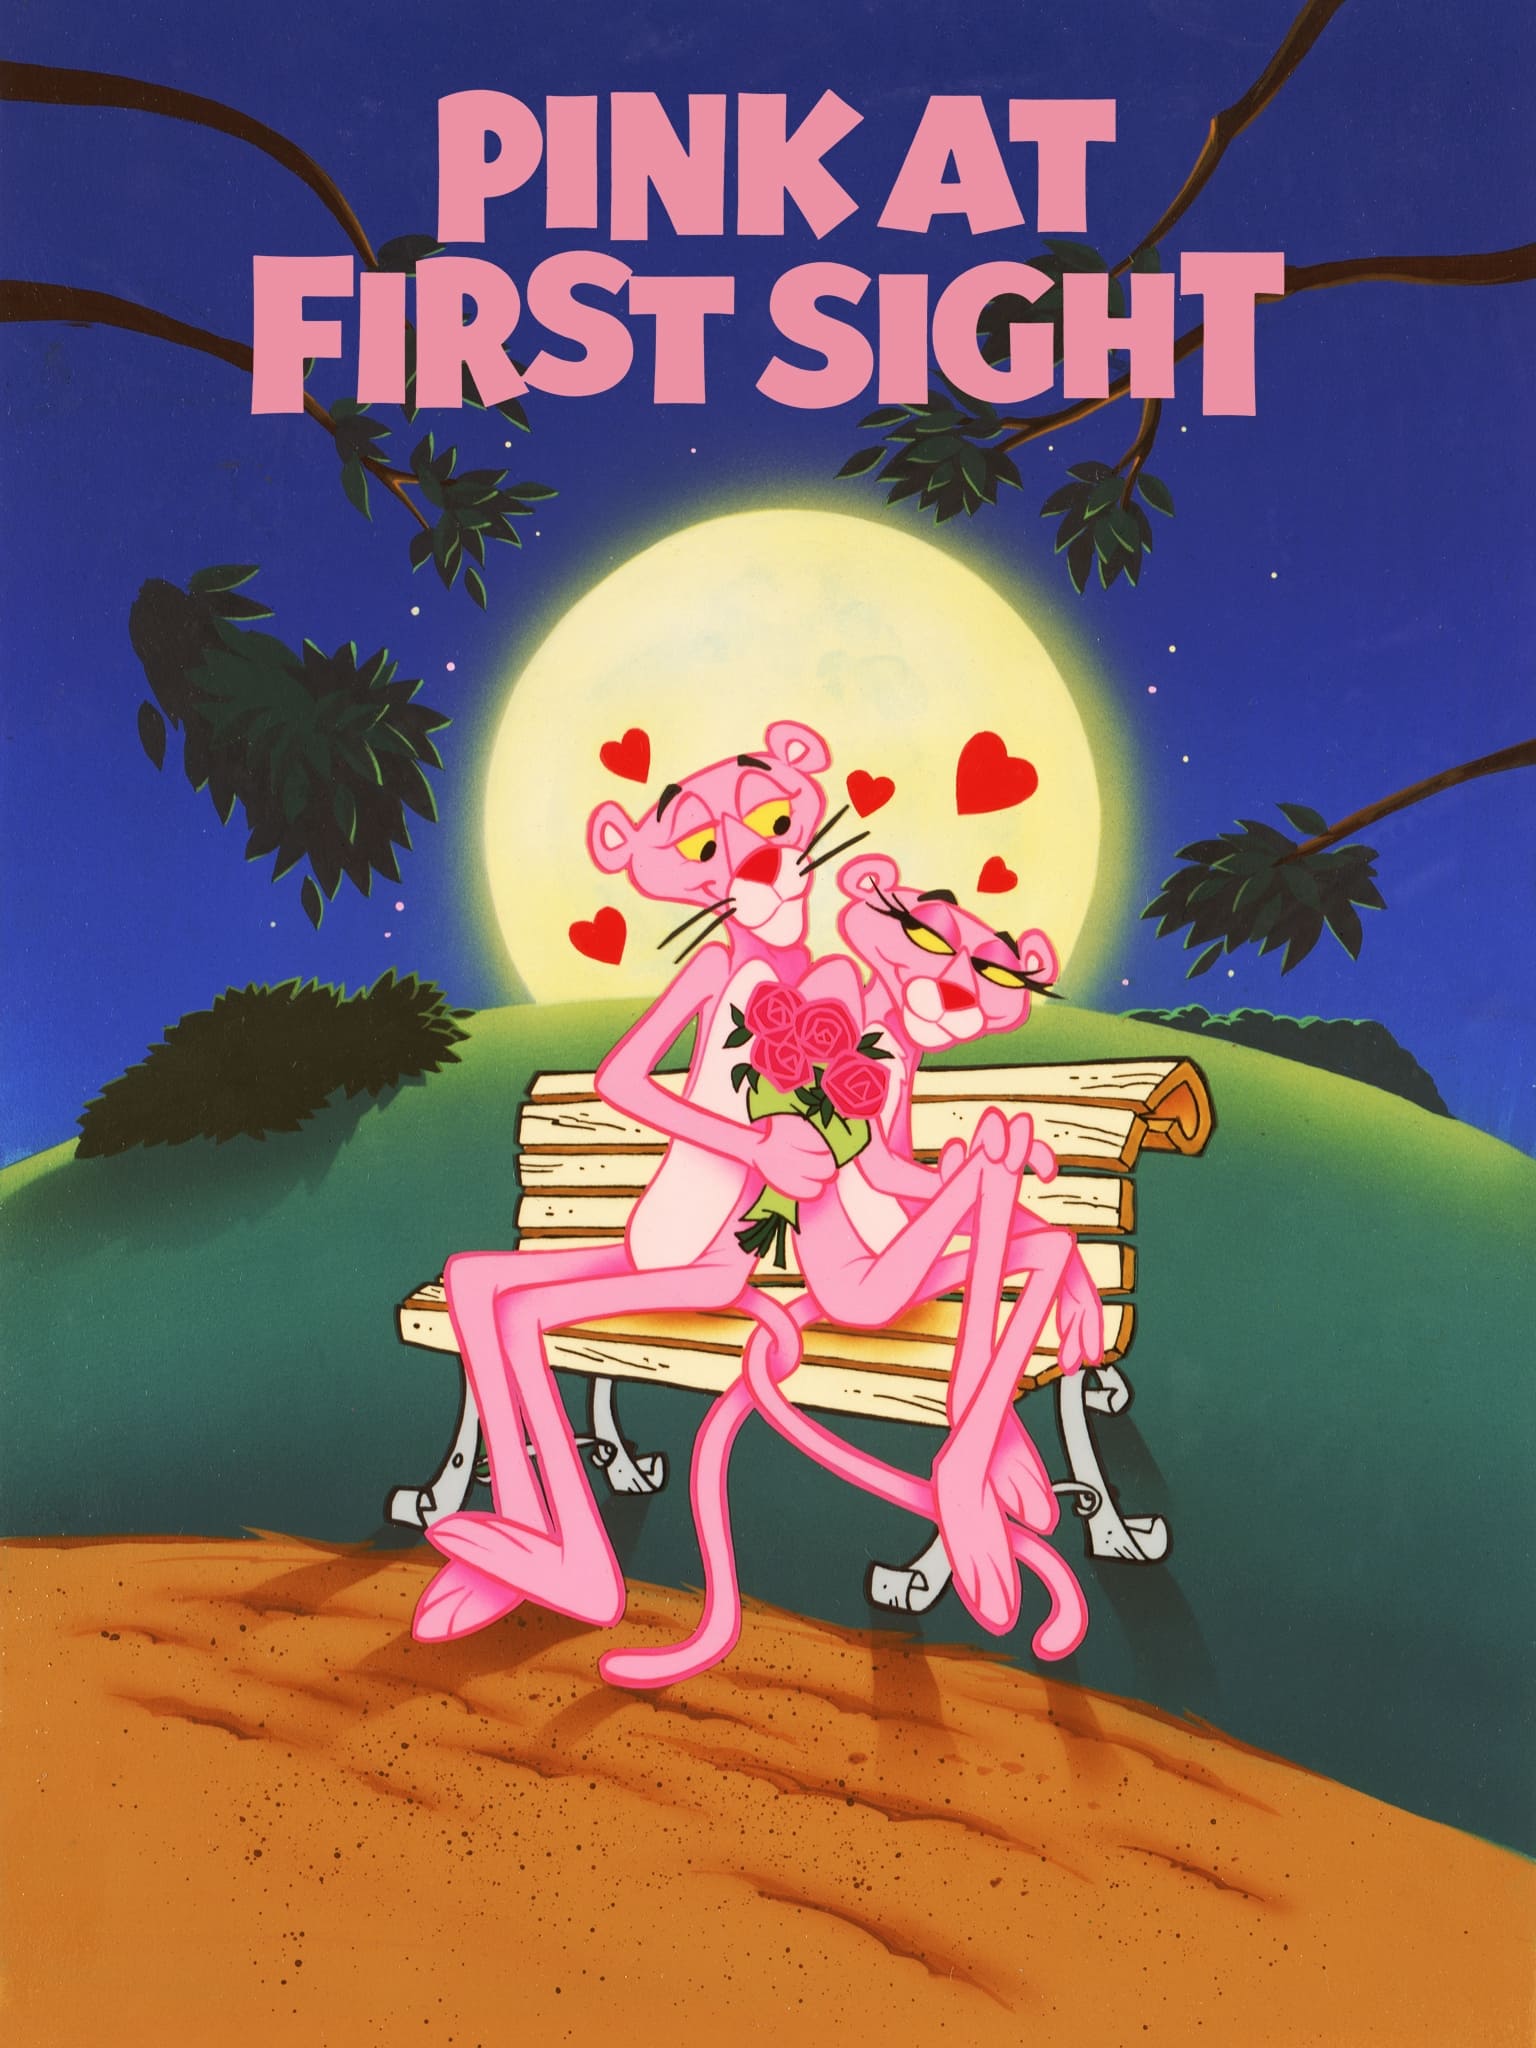 The Pink Panther in 'Pink at First Sight' (1981)